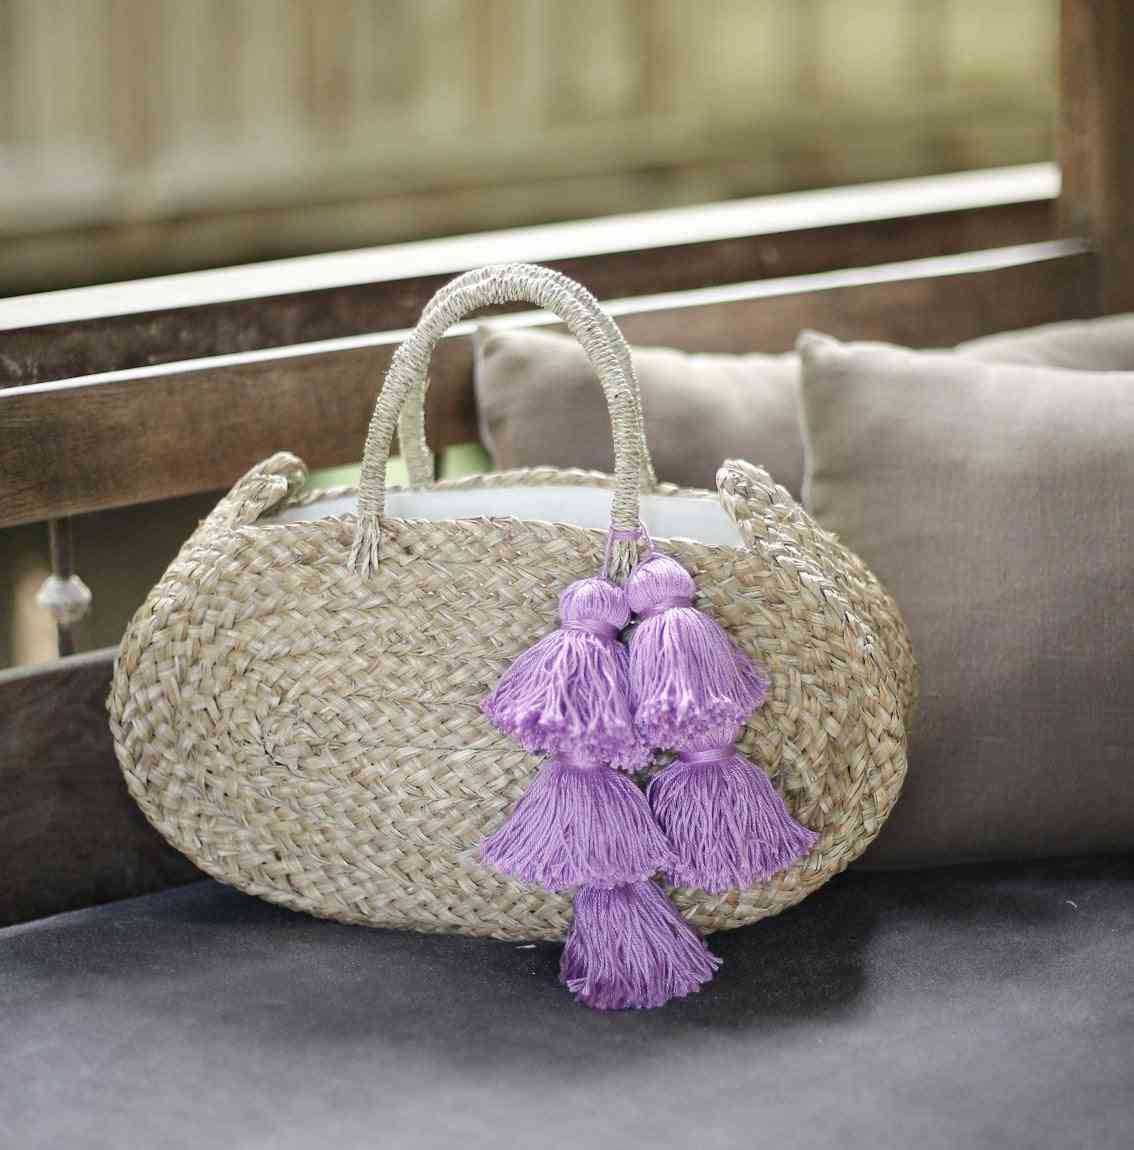 Oval Shaped, Woven Beach Straw Tote Bag With Lavender Tassels